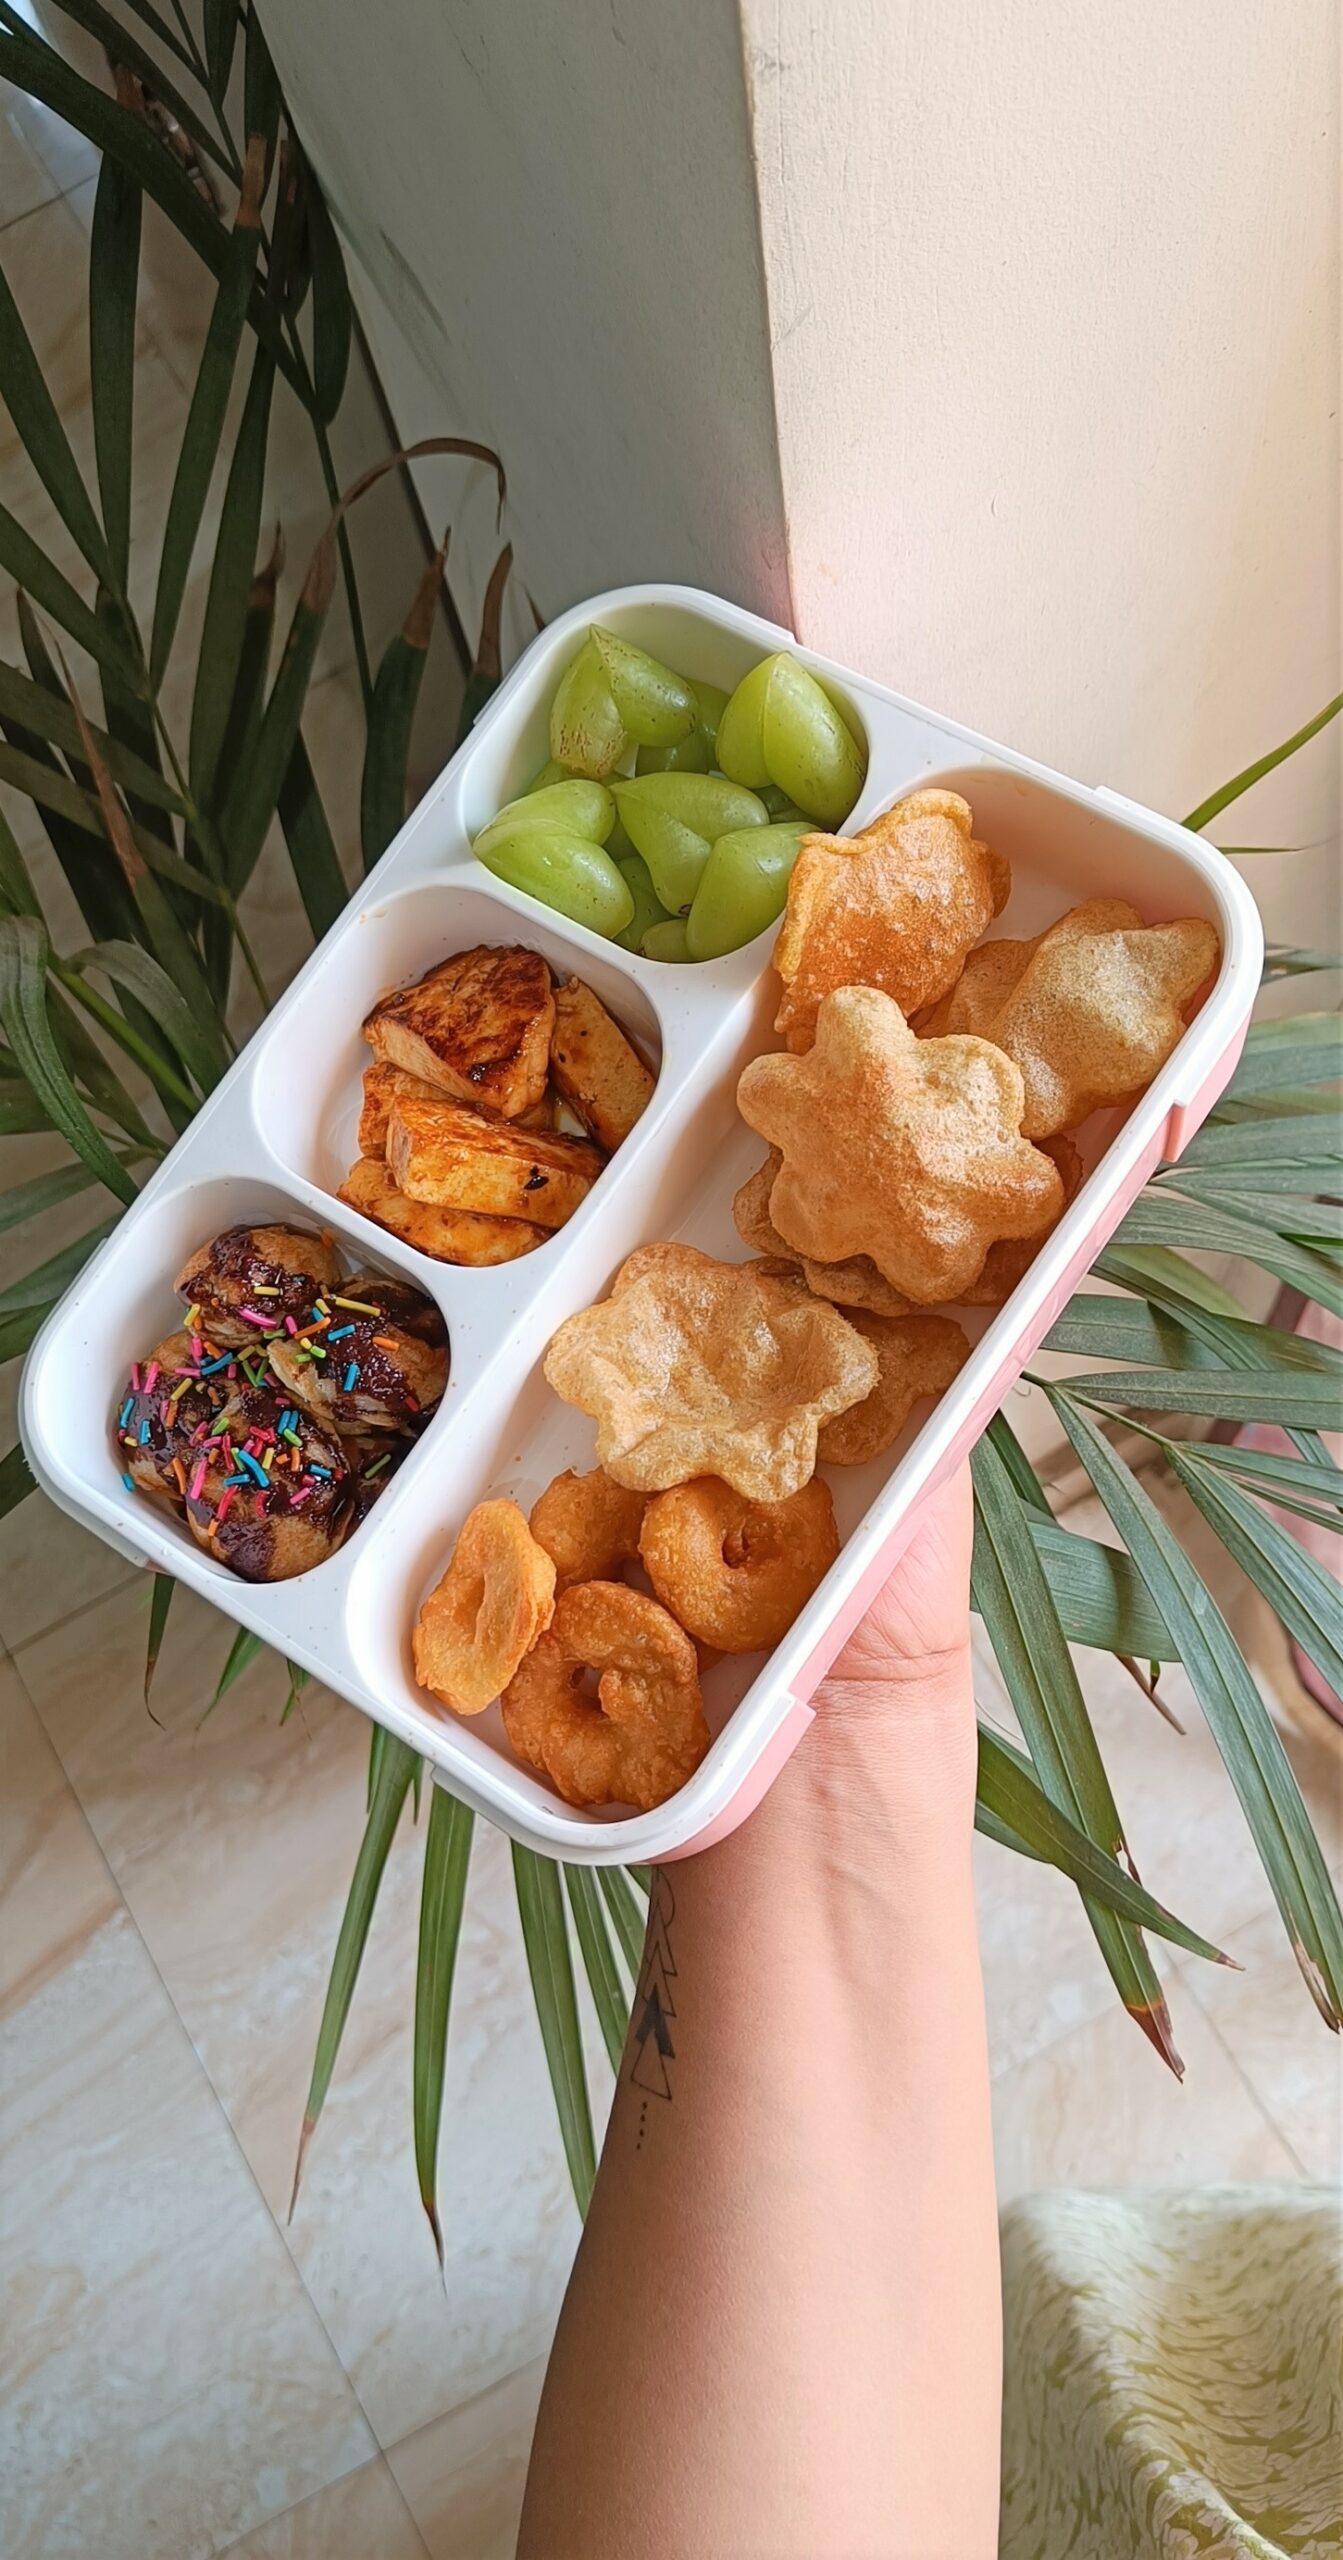 Healthy yet delicious Tiffinbox Ideas for kids which they love to eat